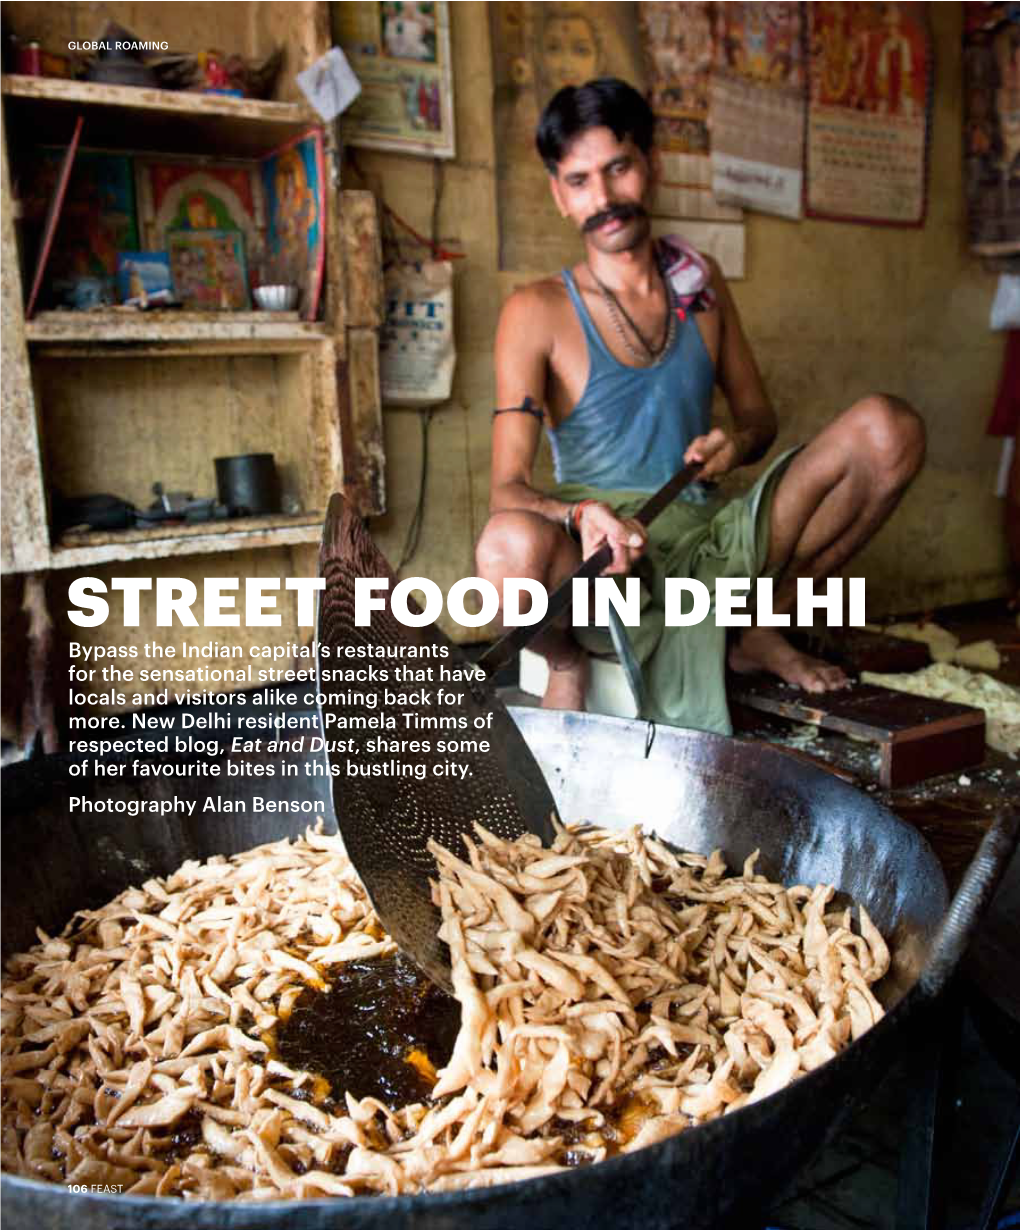 STREET FOOD in DELHI Bypass the Indian Capital’S Restaurants for the Sensational Street Snacks That Have Locals and Visitors Alike Coming Back for More